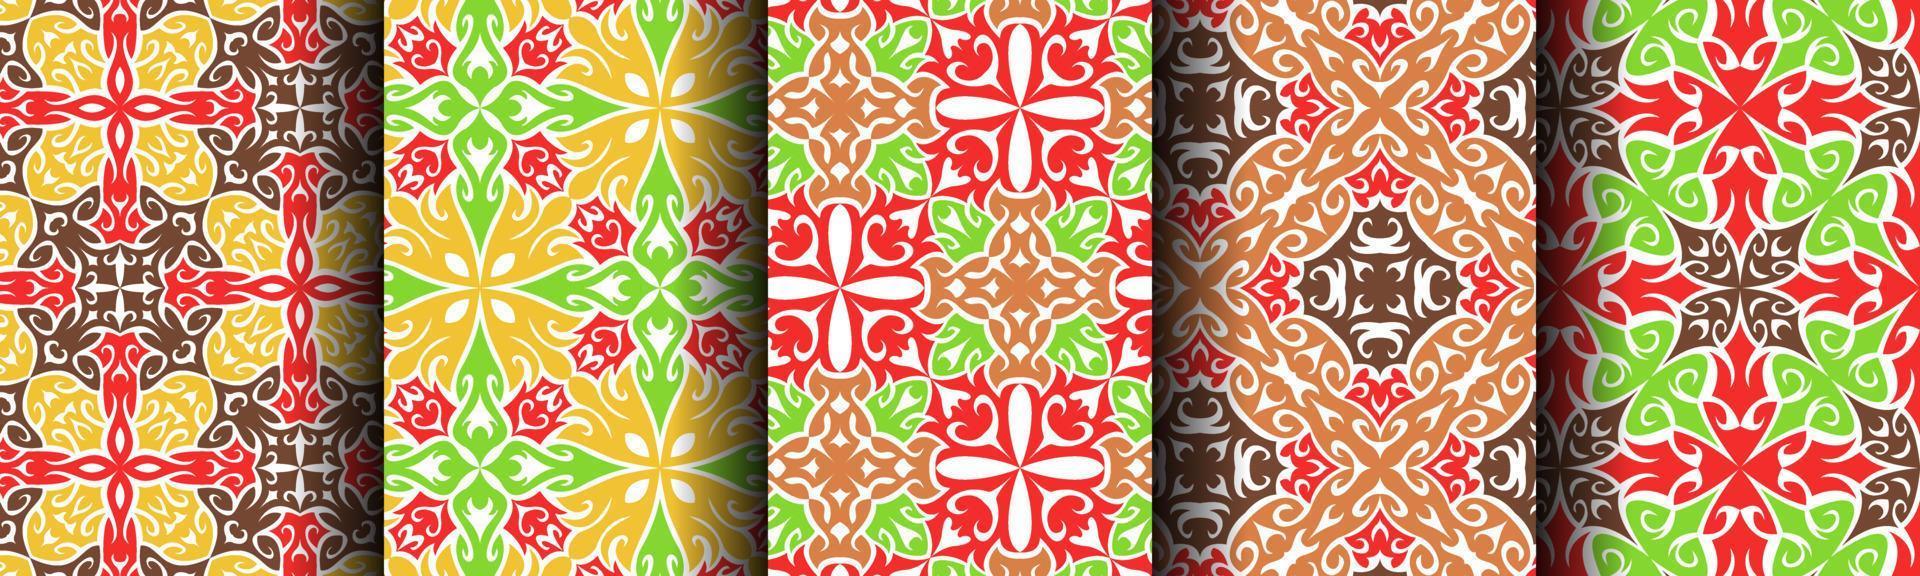 traditional ethnic pattern abstract vector